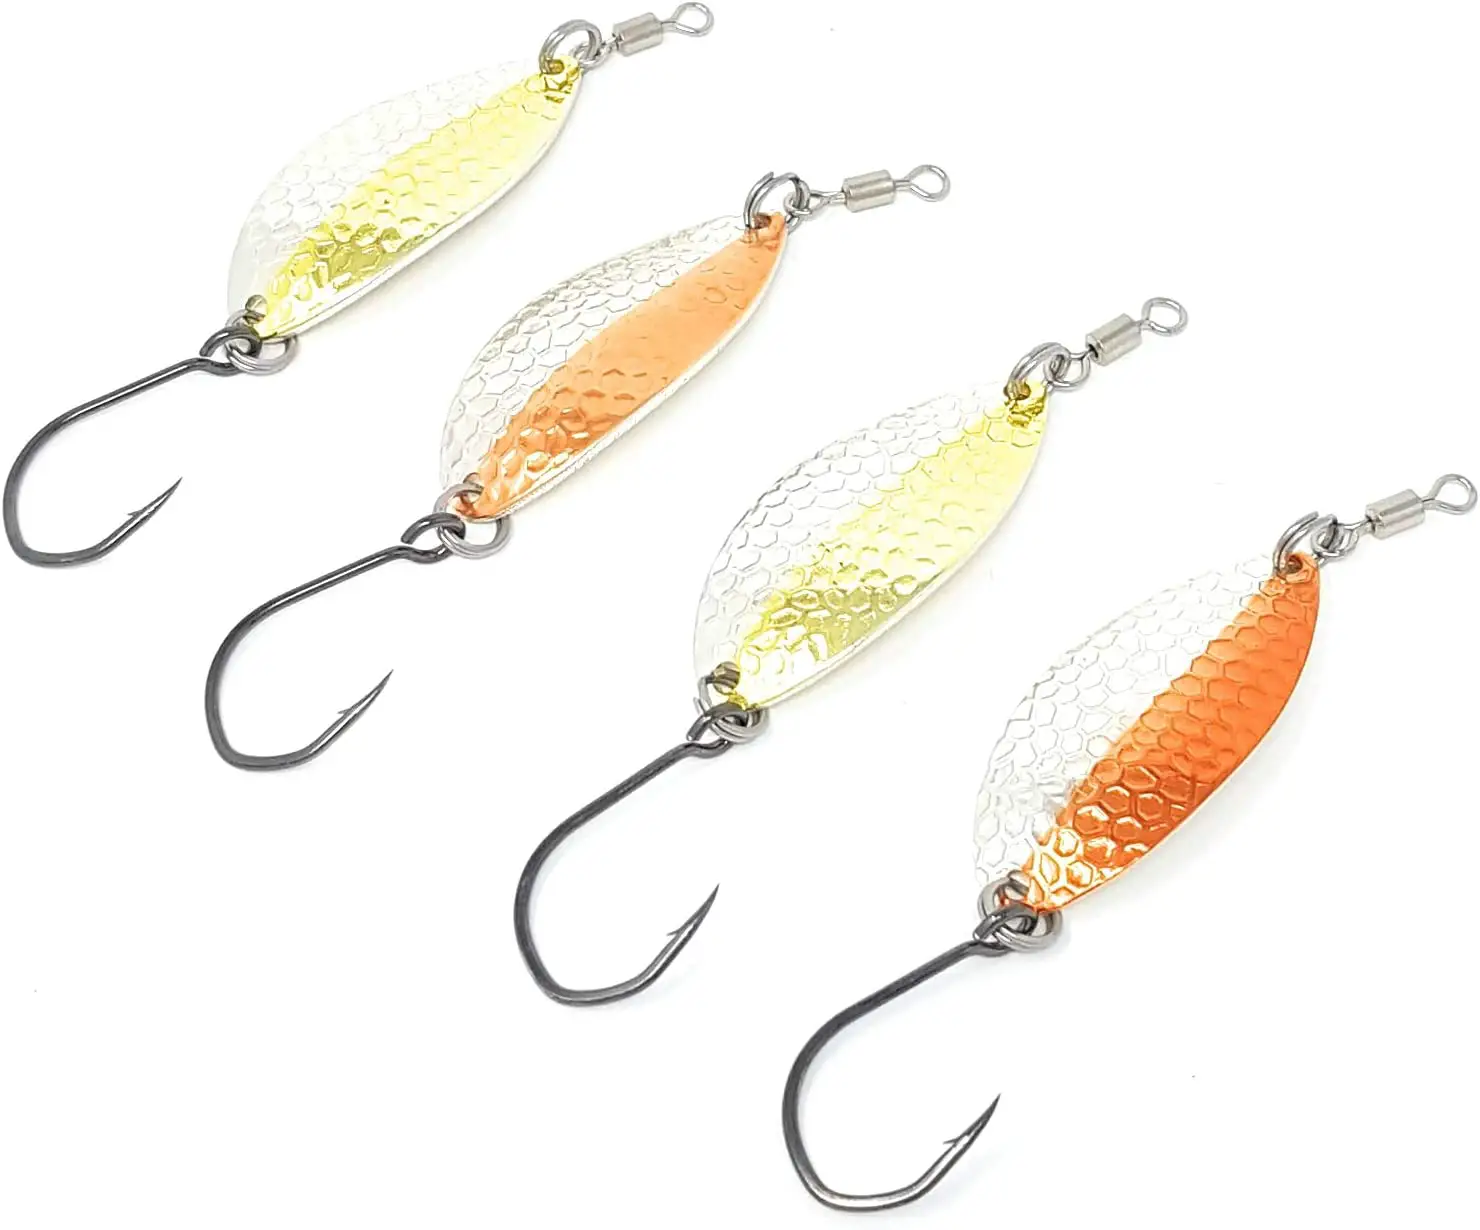 Prime Lures Casting Fishing Spoons